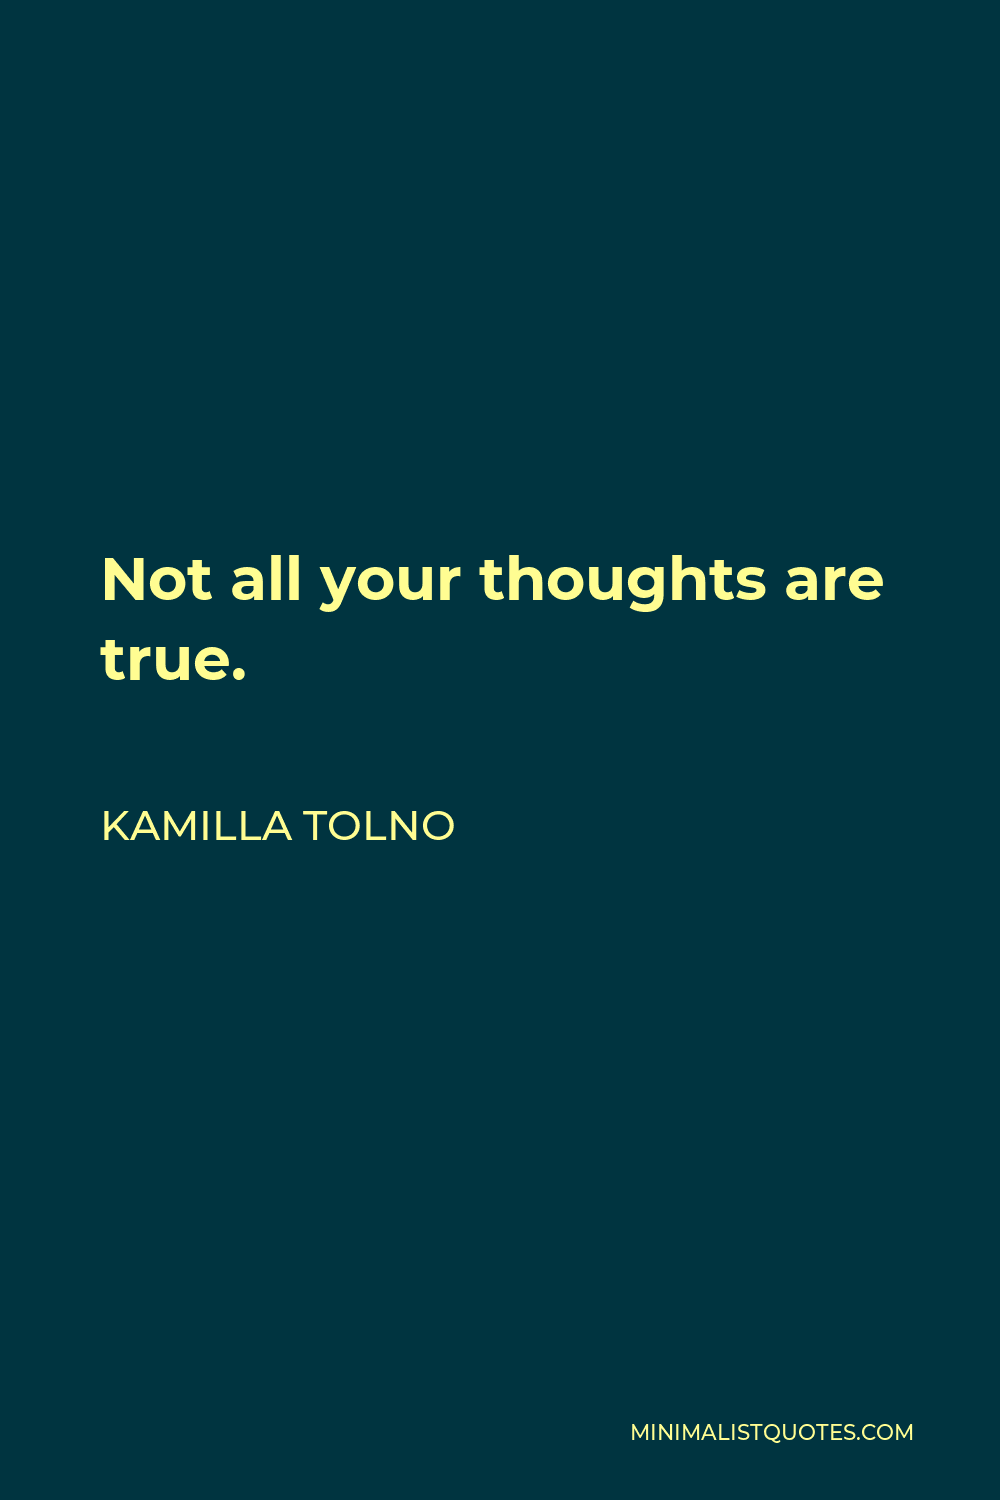 Kamilla Tolno Quote - Not all your thoughts are true.